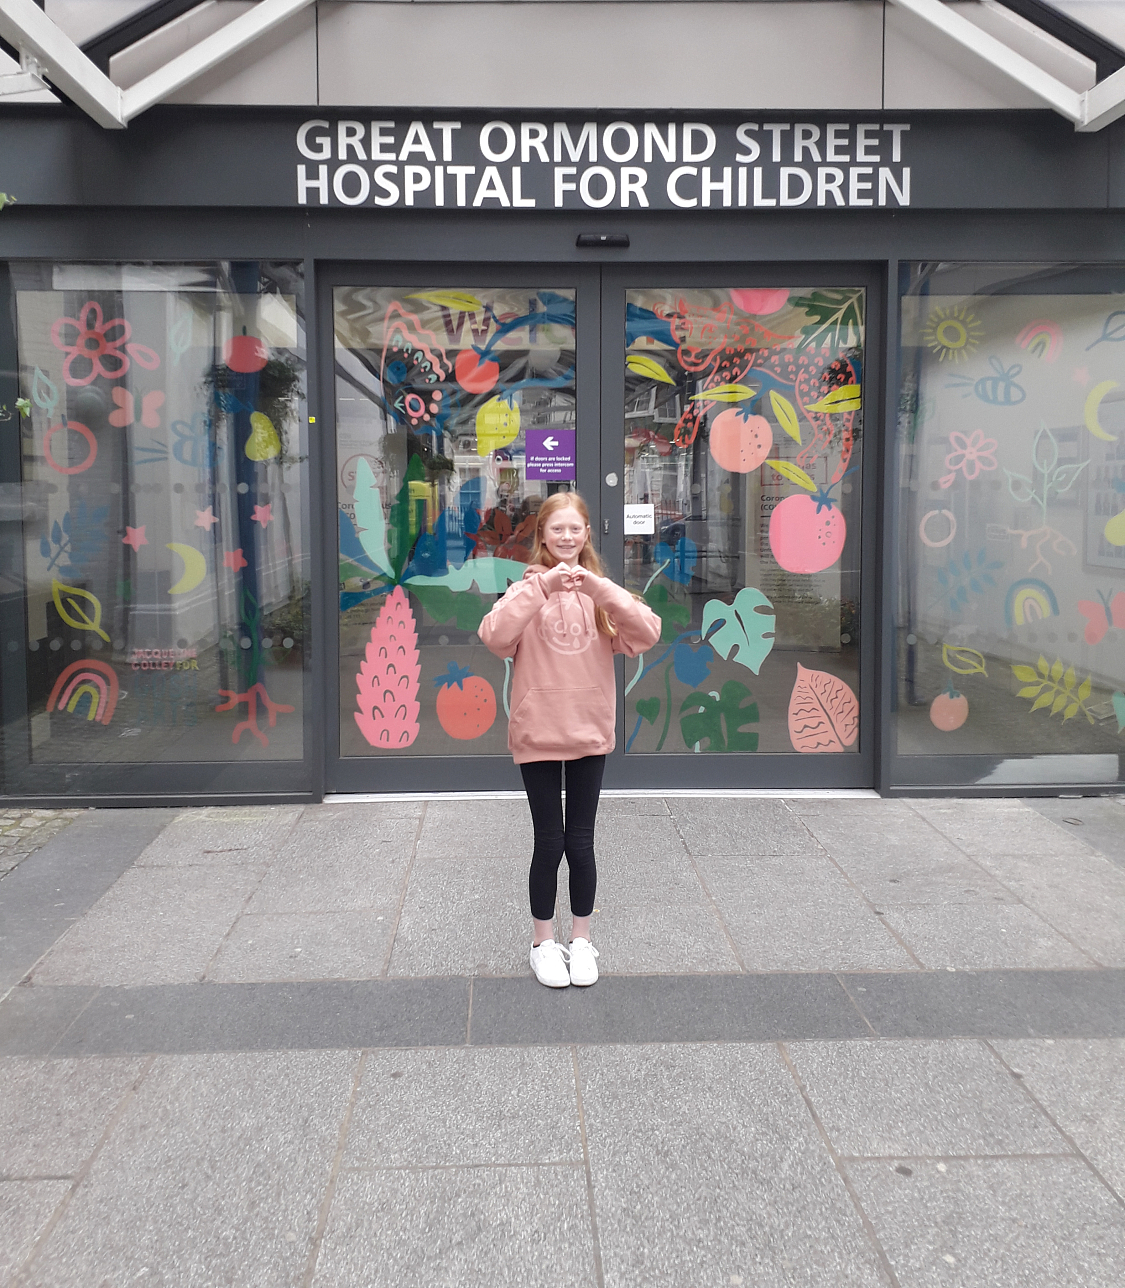 A girl stands outside Great Ormond Street Hospital for Children